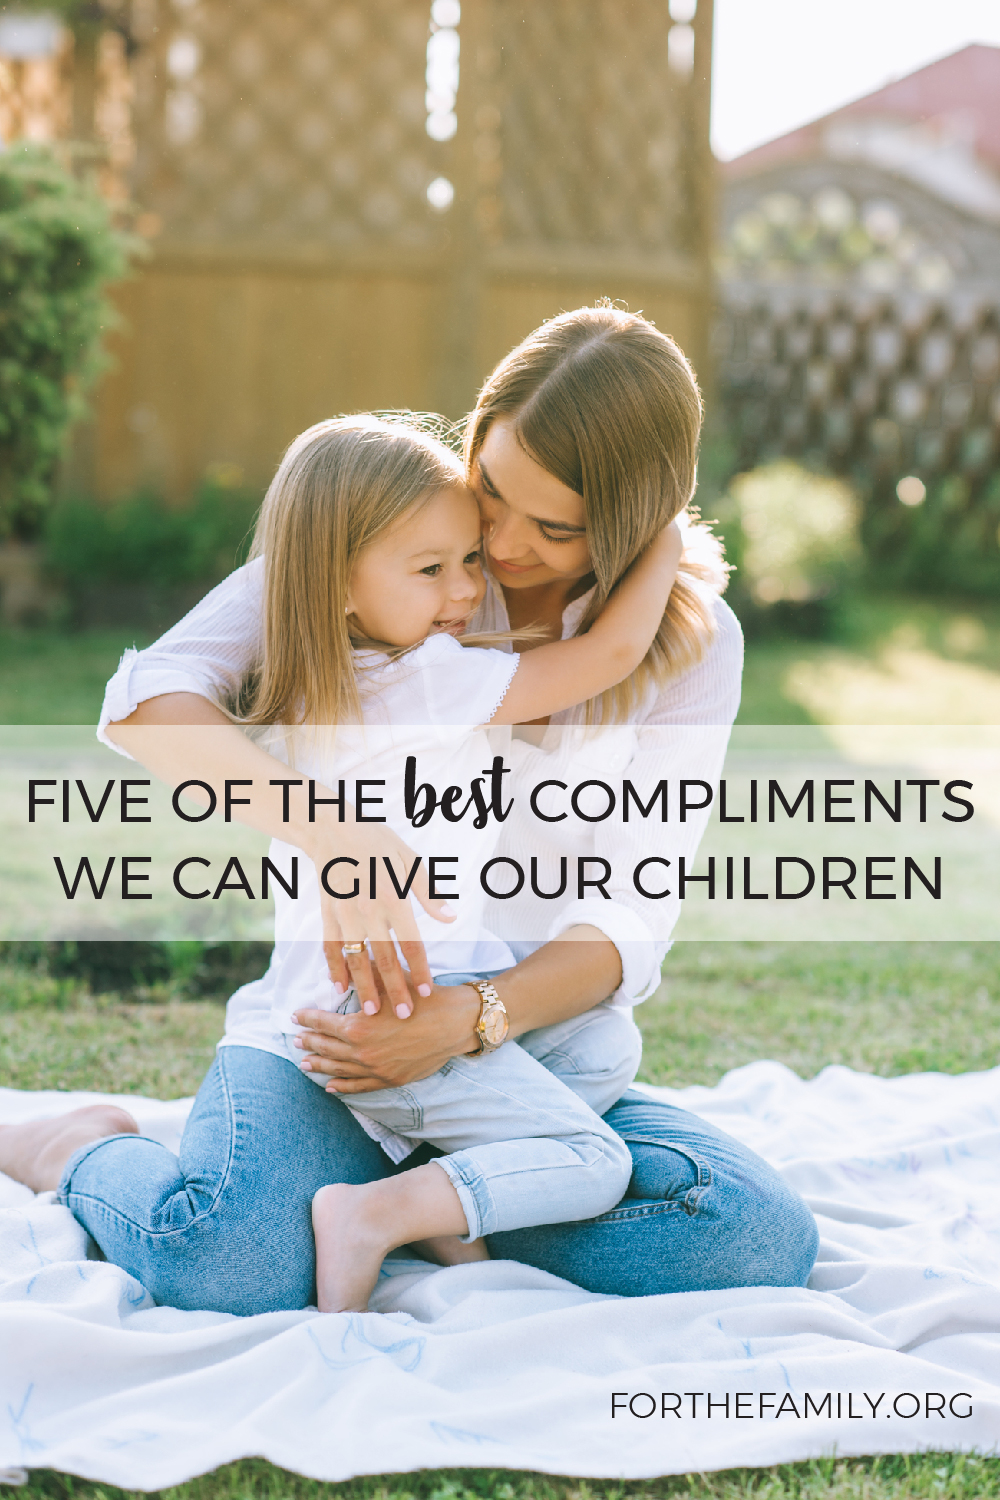 Five of the Best Compliments We Can Give Our Children